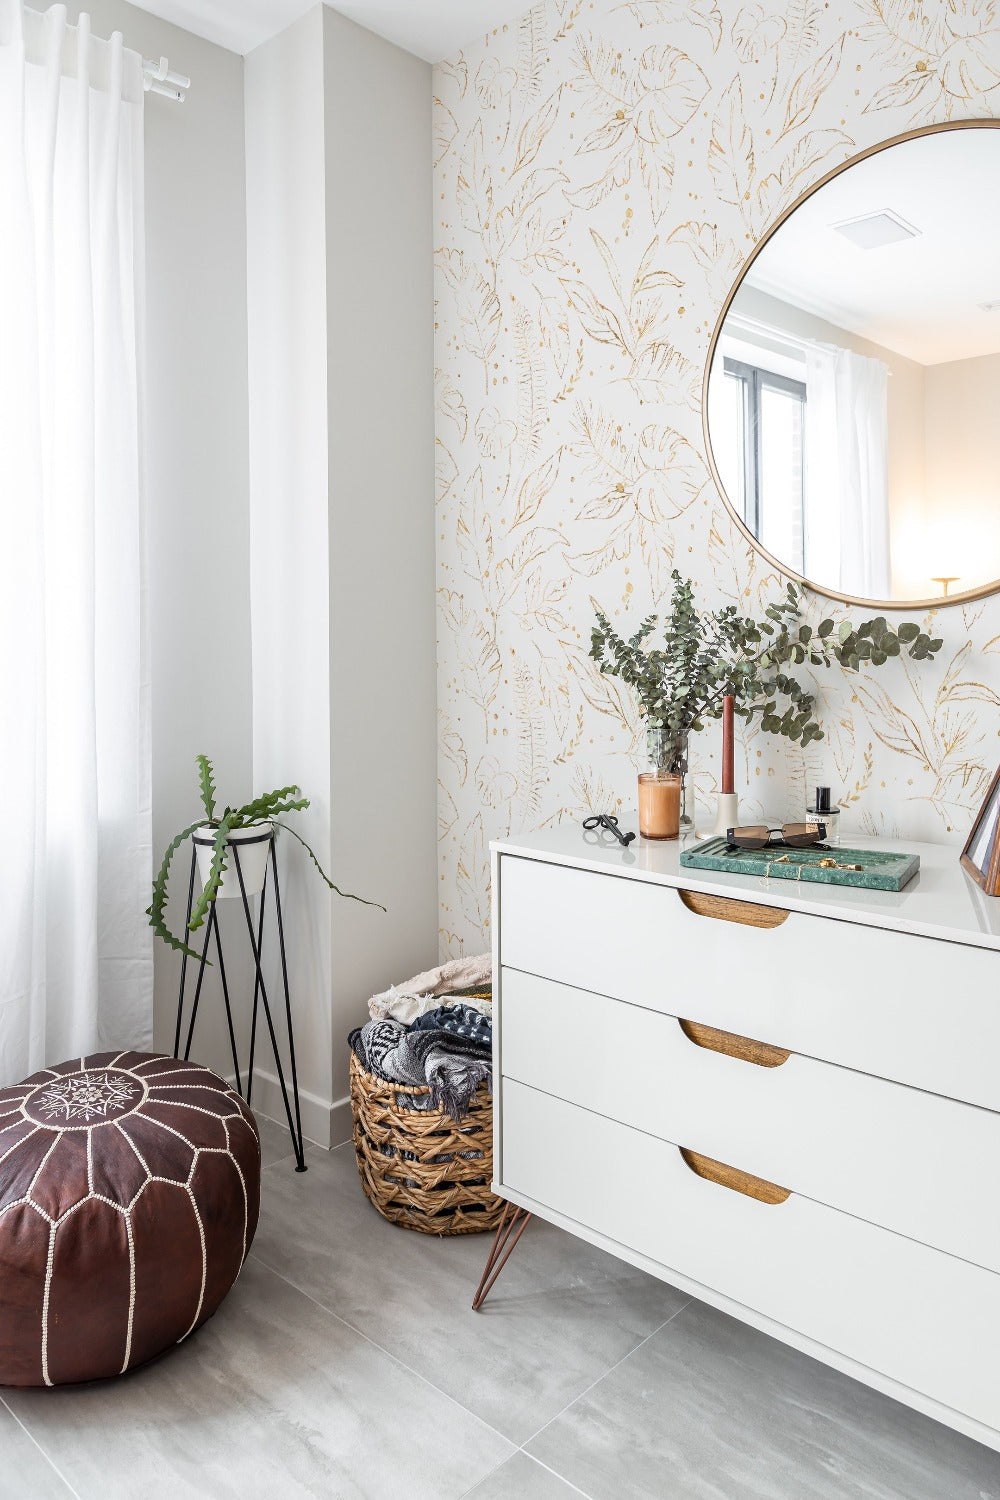 A chic and contemporary room setting featuring the Gold Tropical Wallpaper, with gold-leaf tropical plant illustrations adorning the wall, complemented by modern furnishings including a white dresser with gold handles, a brown leather pouf, and a round mirror.